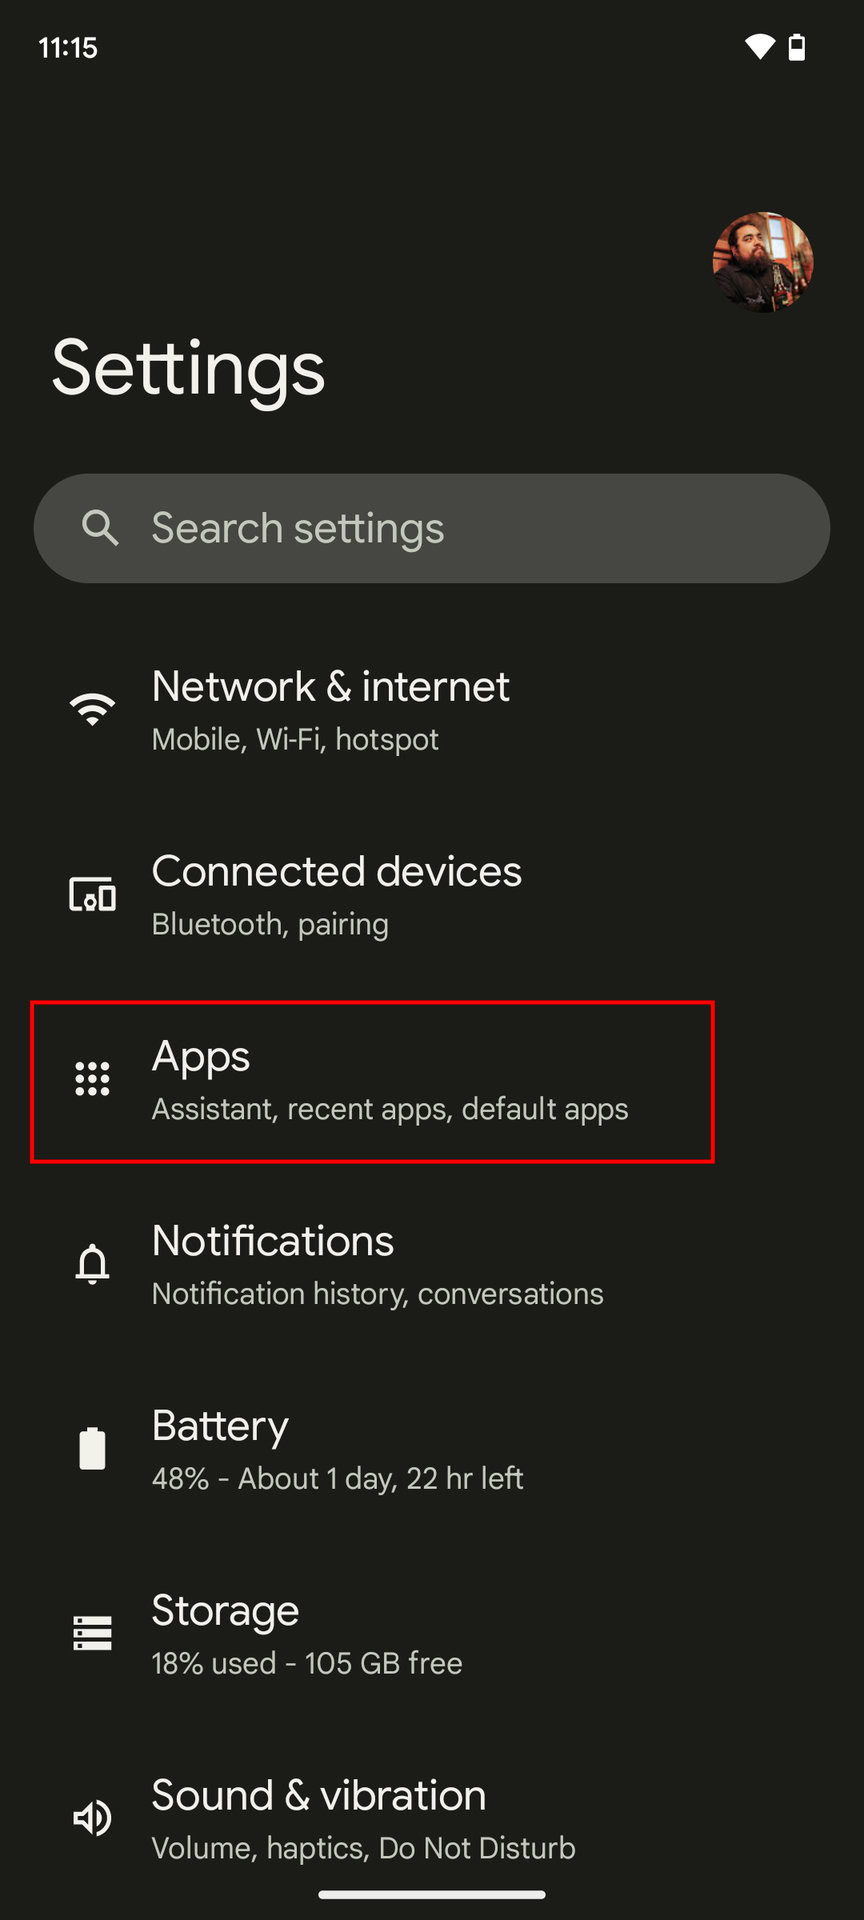 Why I cannot download some application in Playstore?